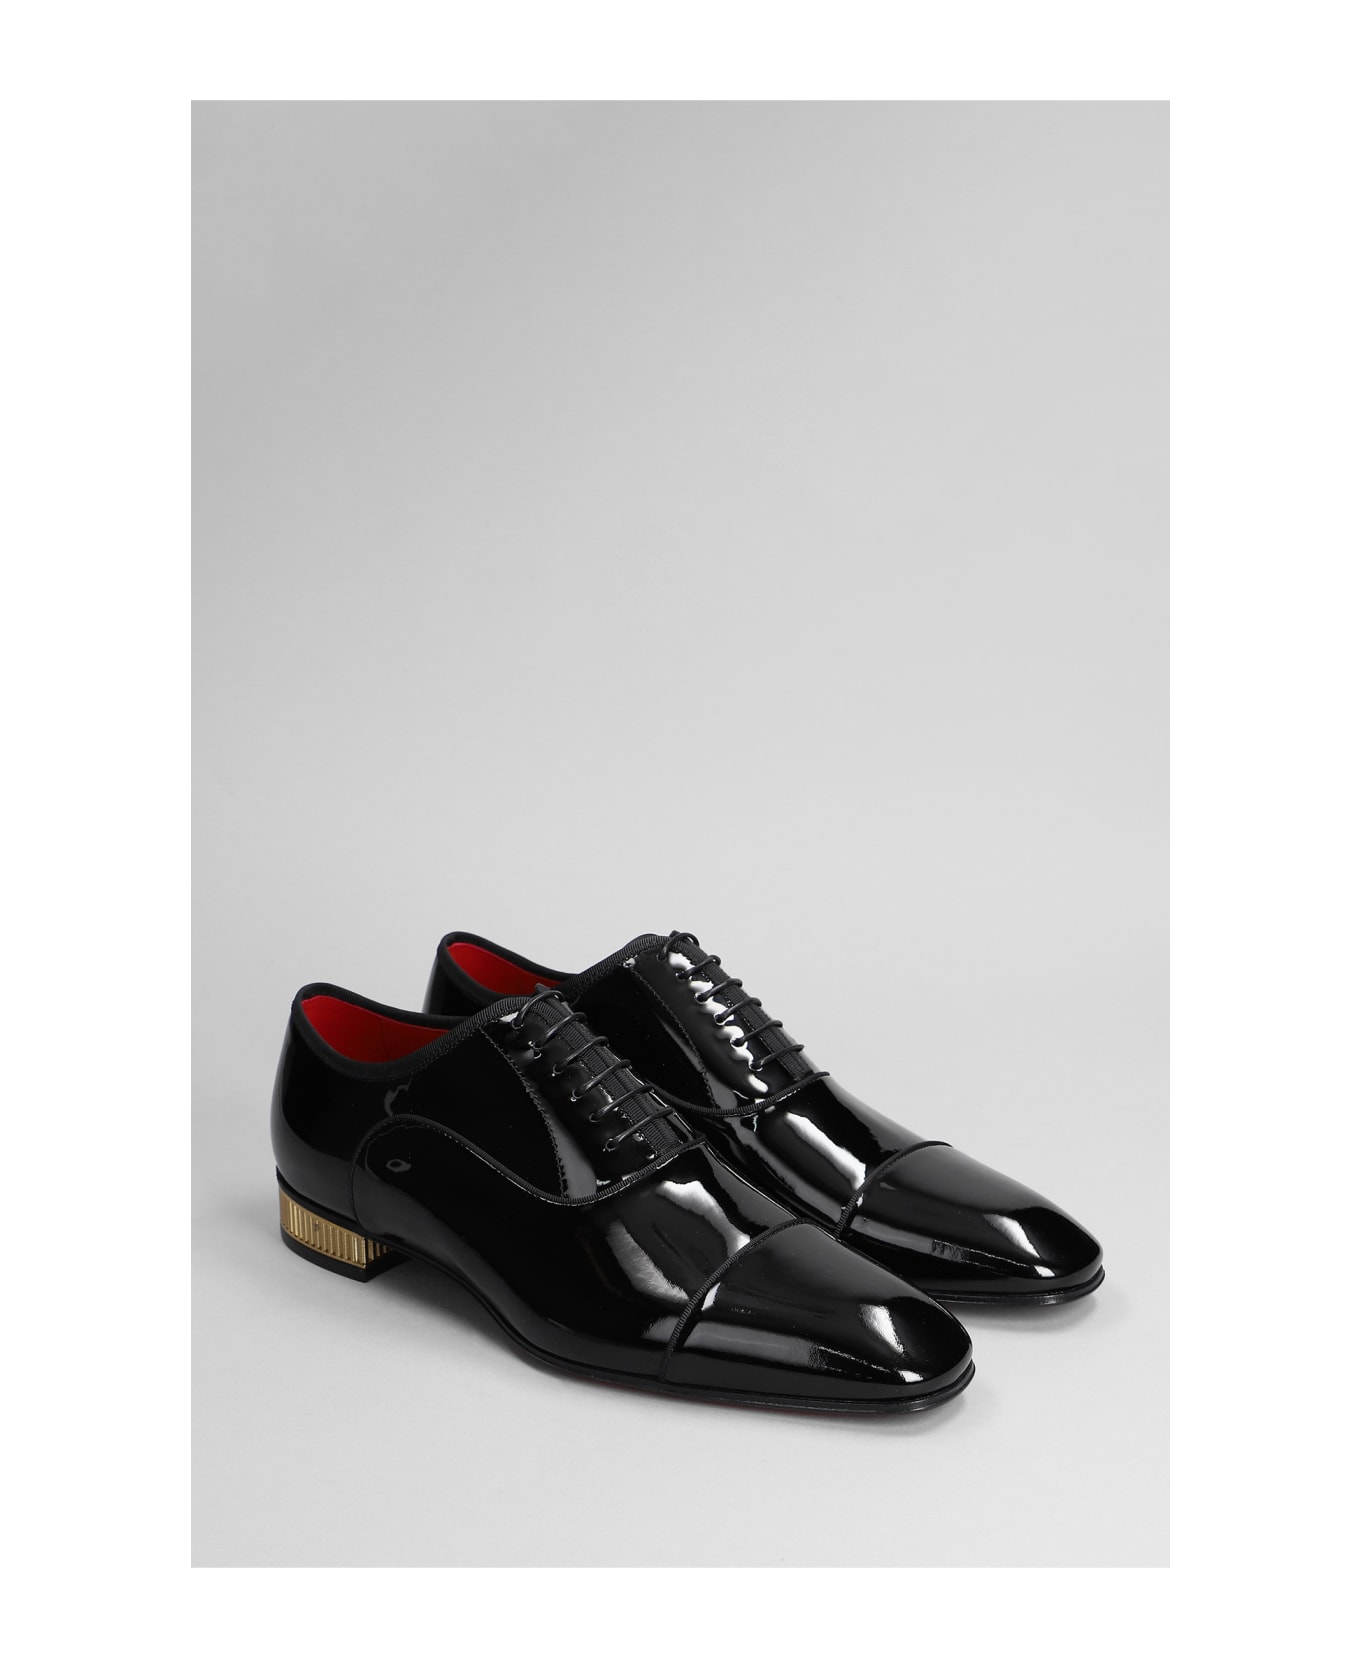 Christian Louboutin Met Greggo Flat Lace Up Shoes In Black Patent ...